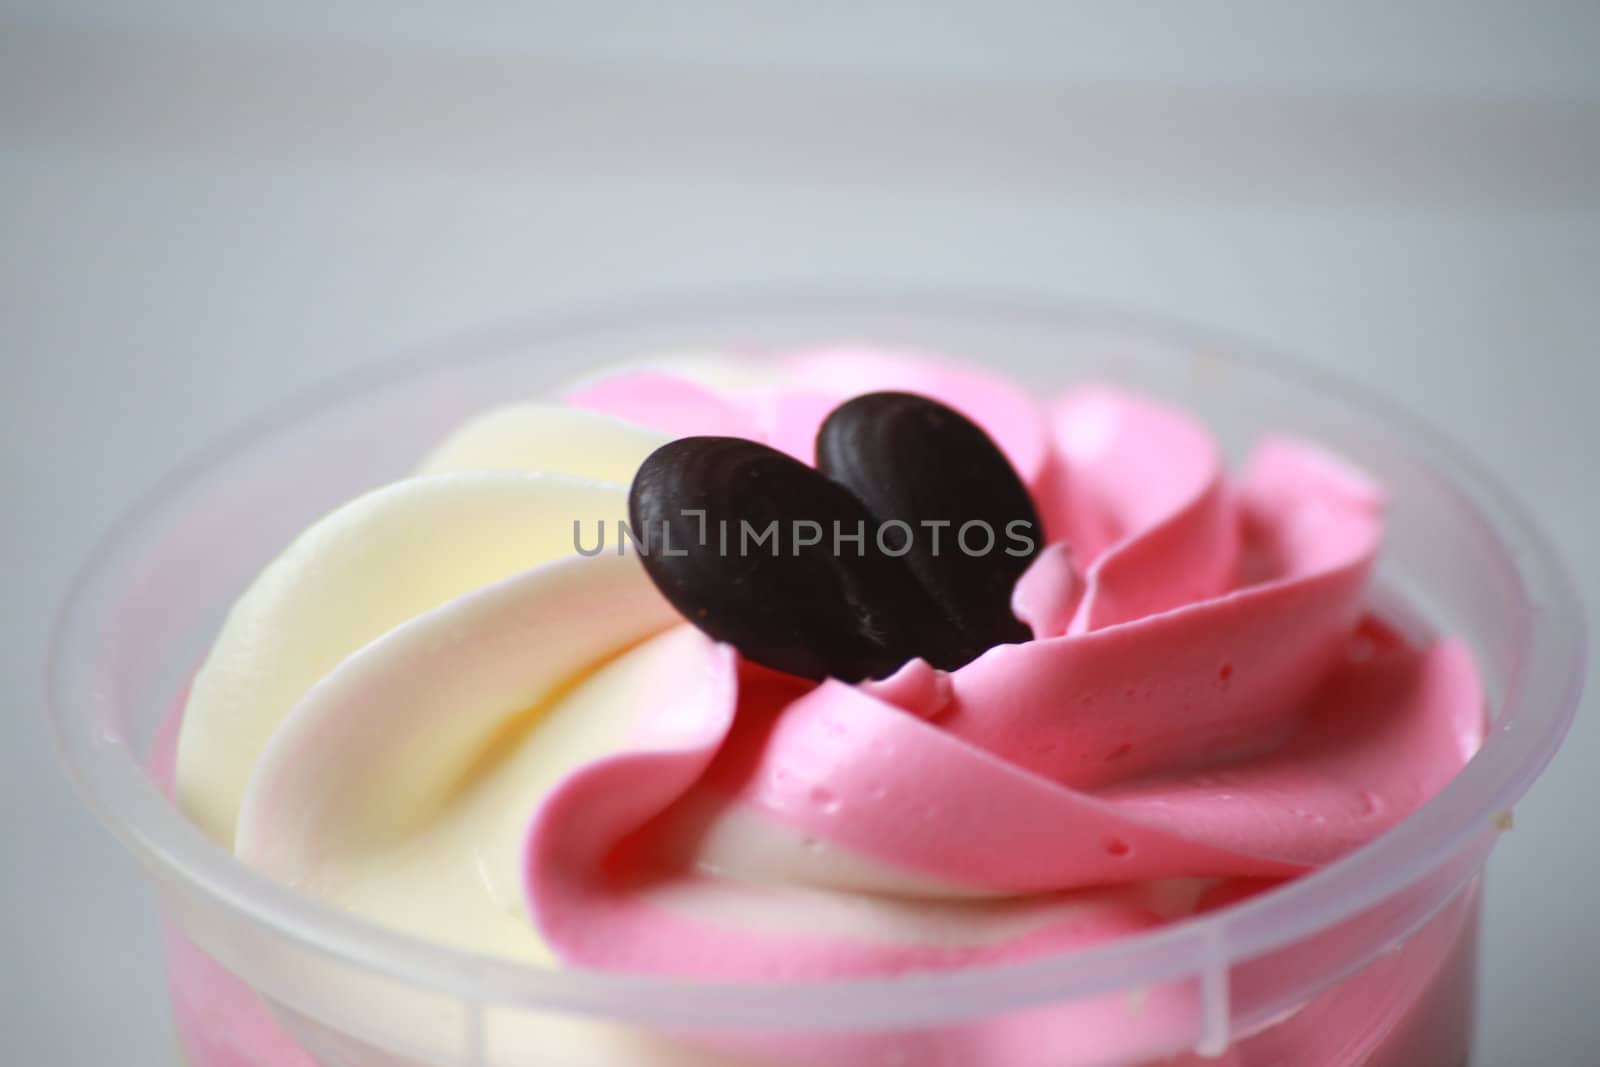 This is a cup cake in taste of vanila and strawberry.It's decorate by chocolate in a shape of heart,looks be appetizing.